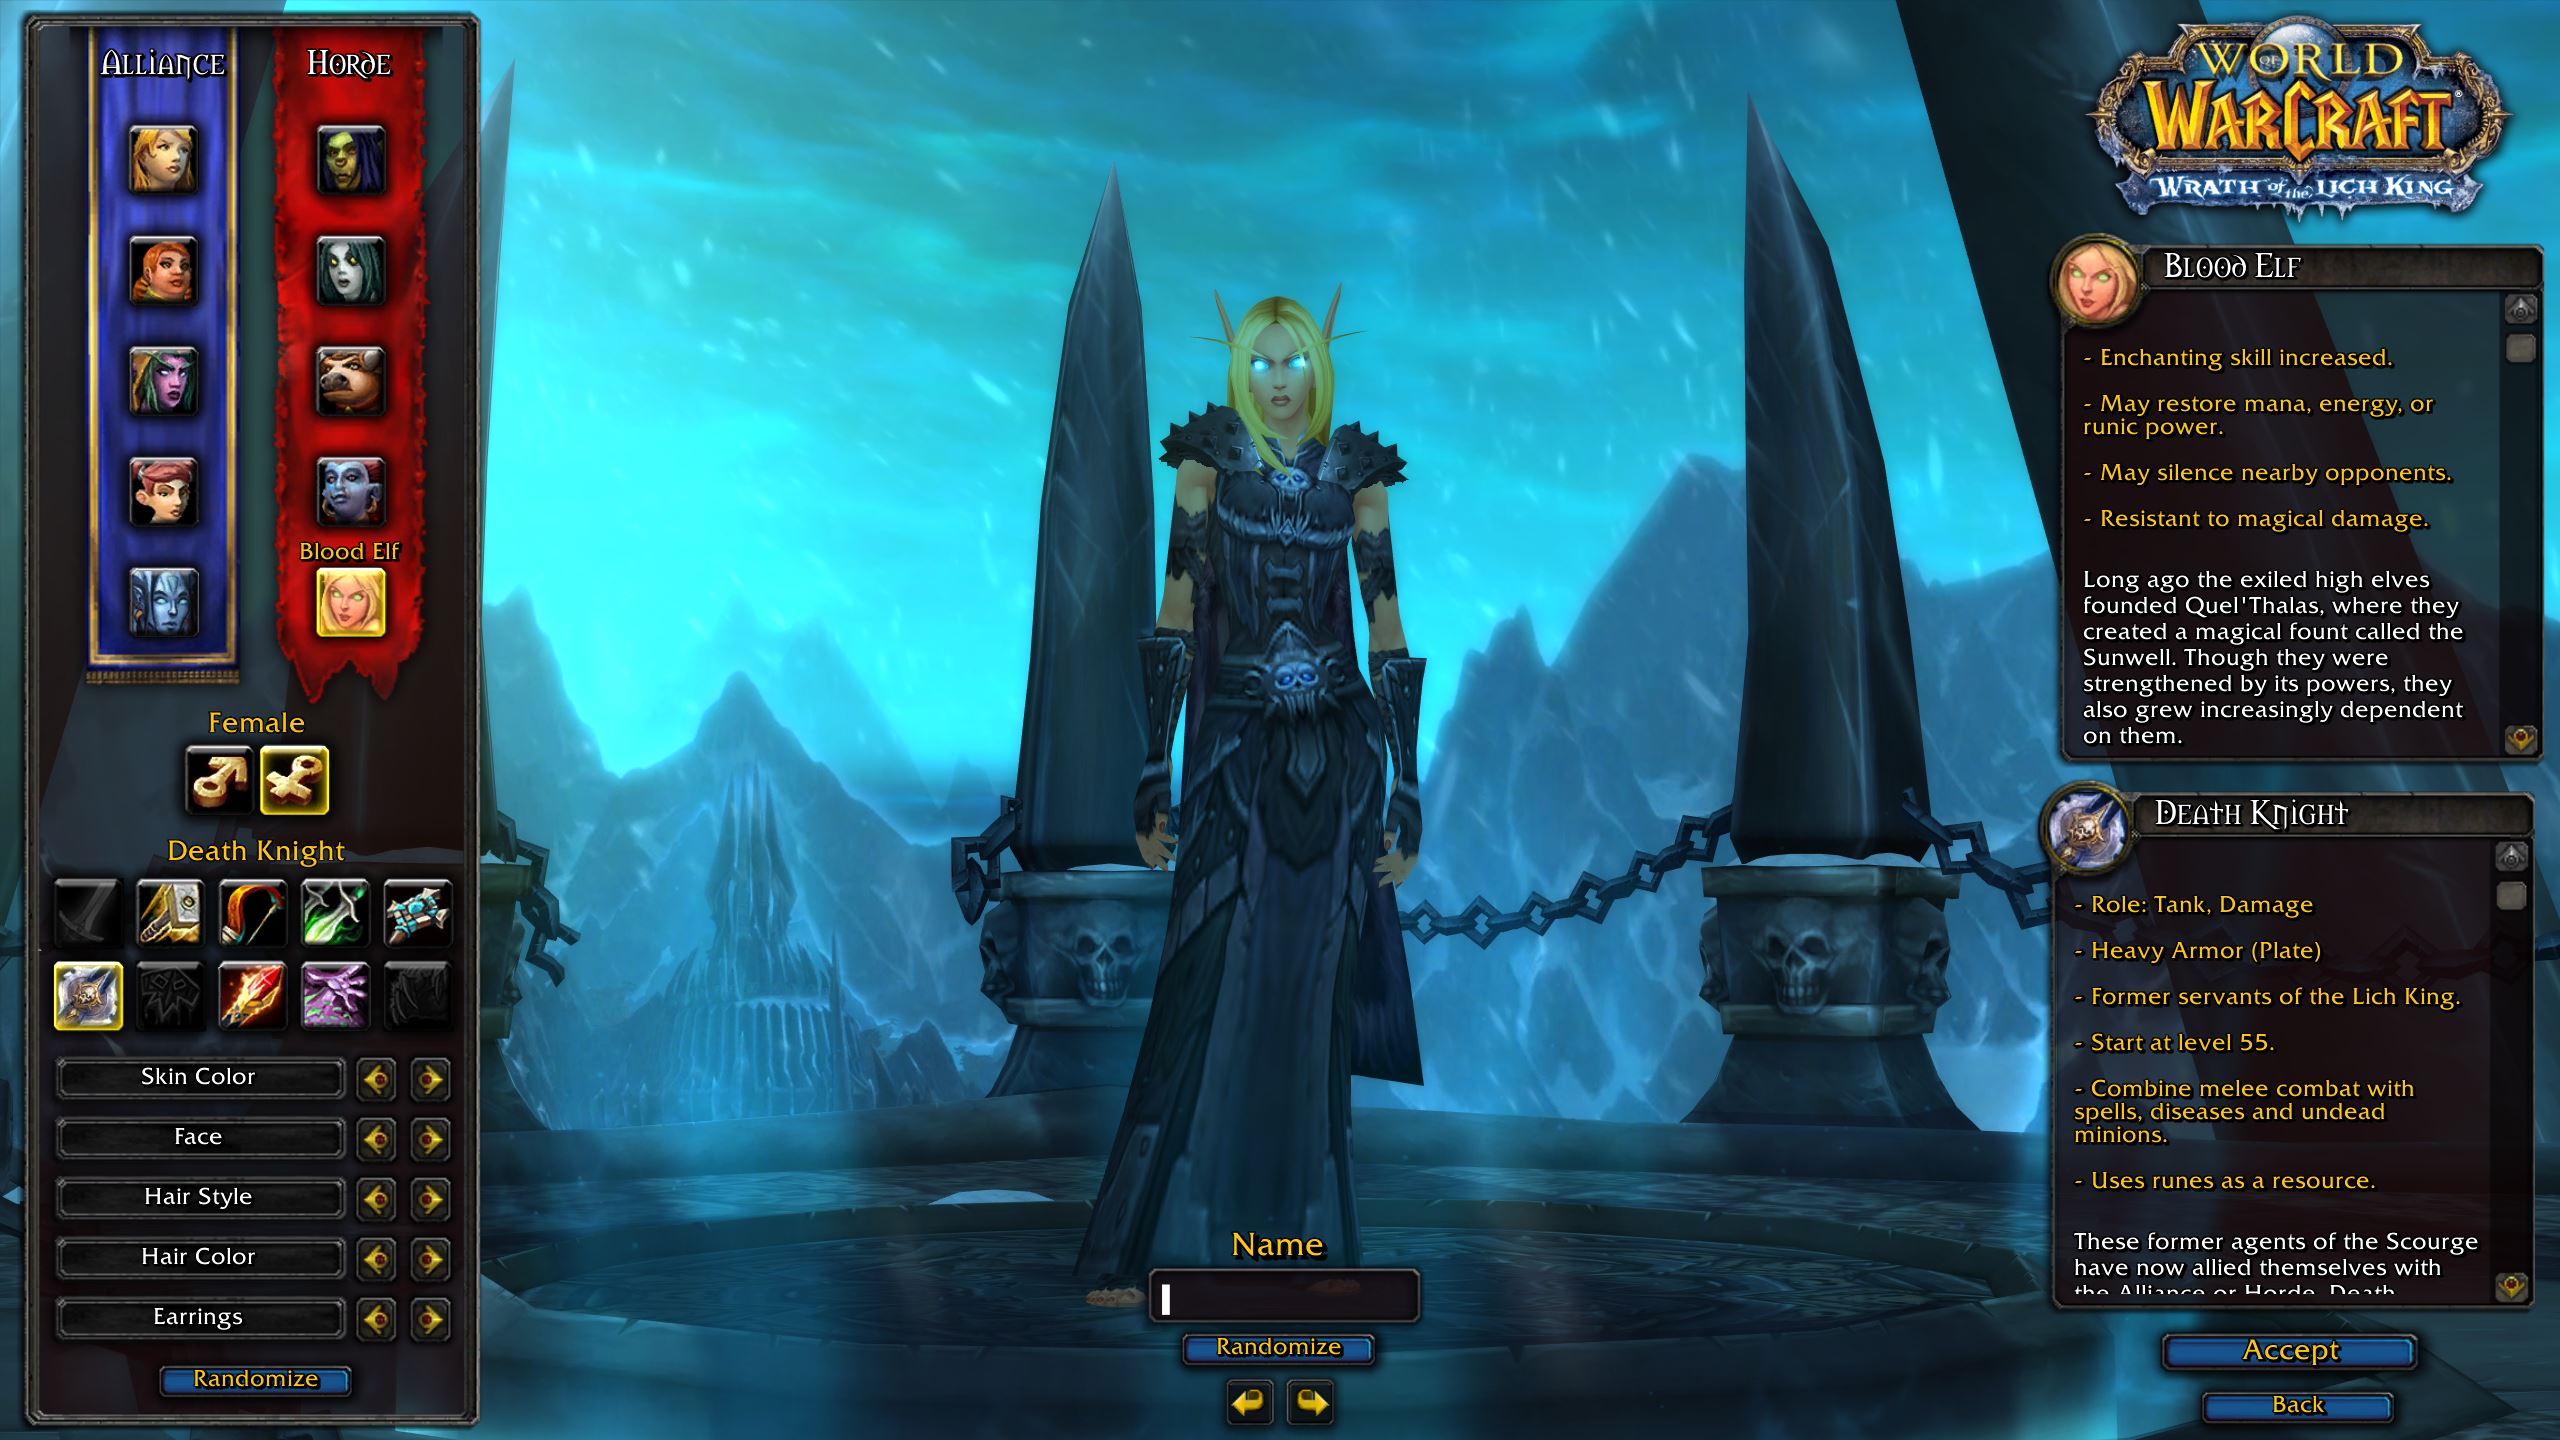 World of Warcraft Wrath of the lich King Classic